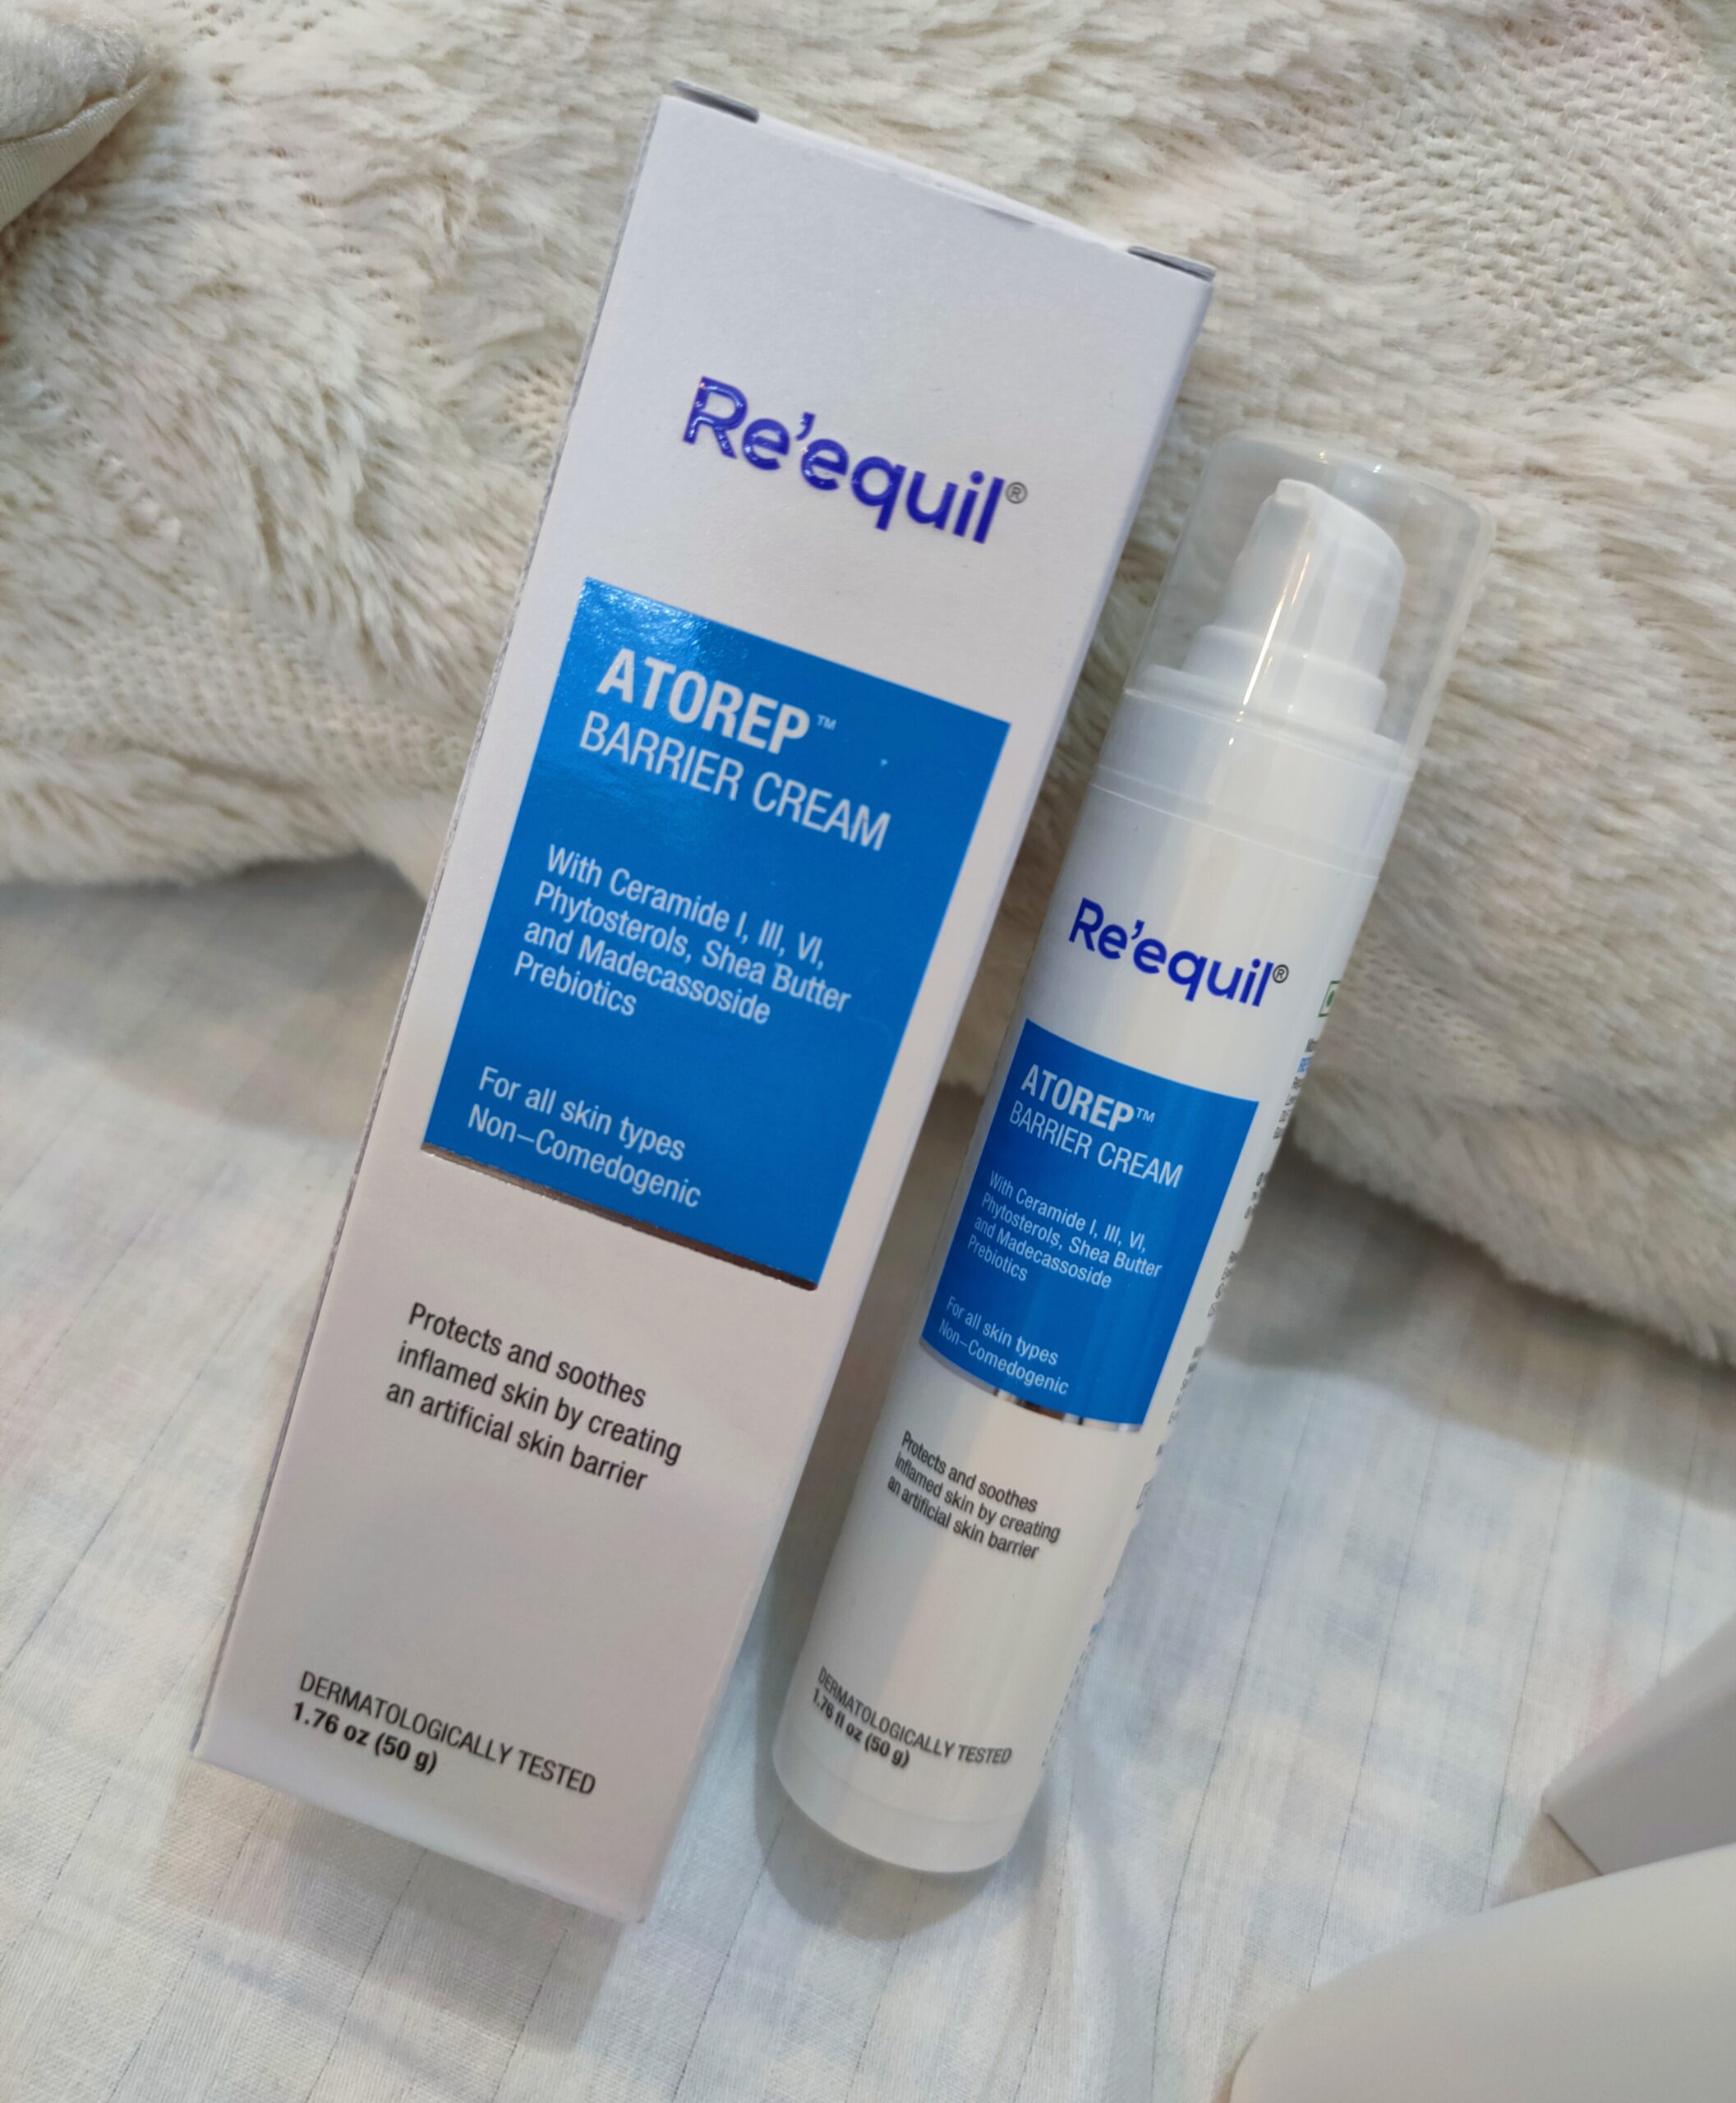 Re’equil Atorep Body Lotion and Barrier Cream Review